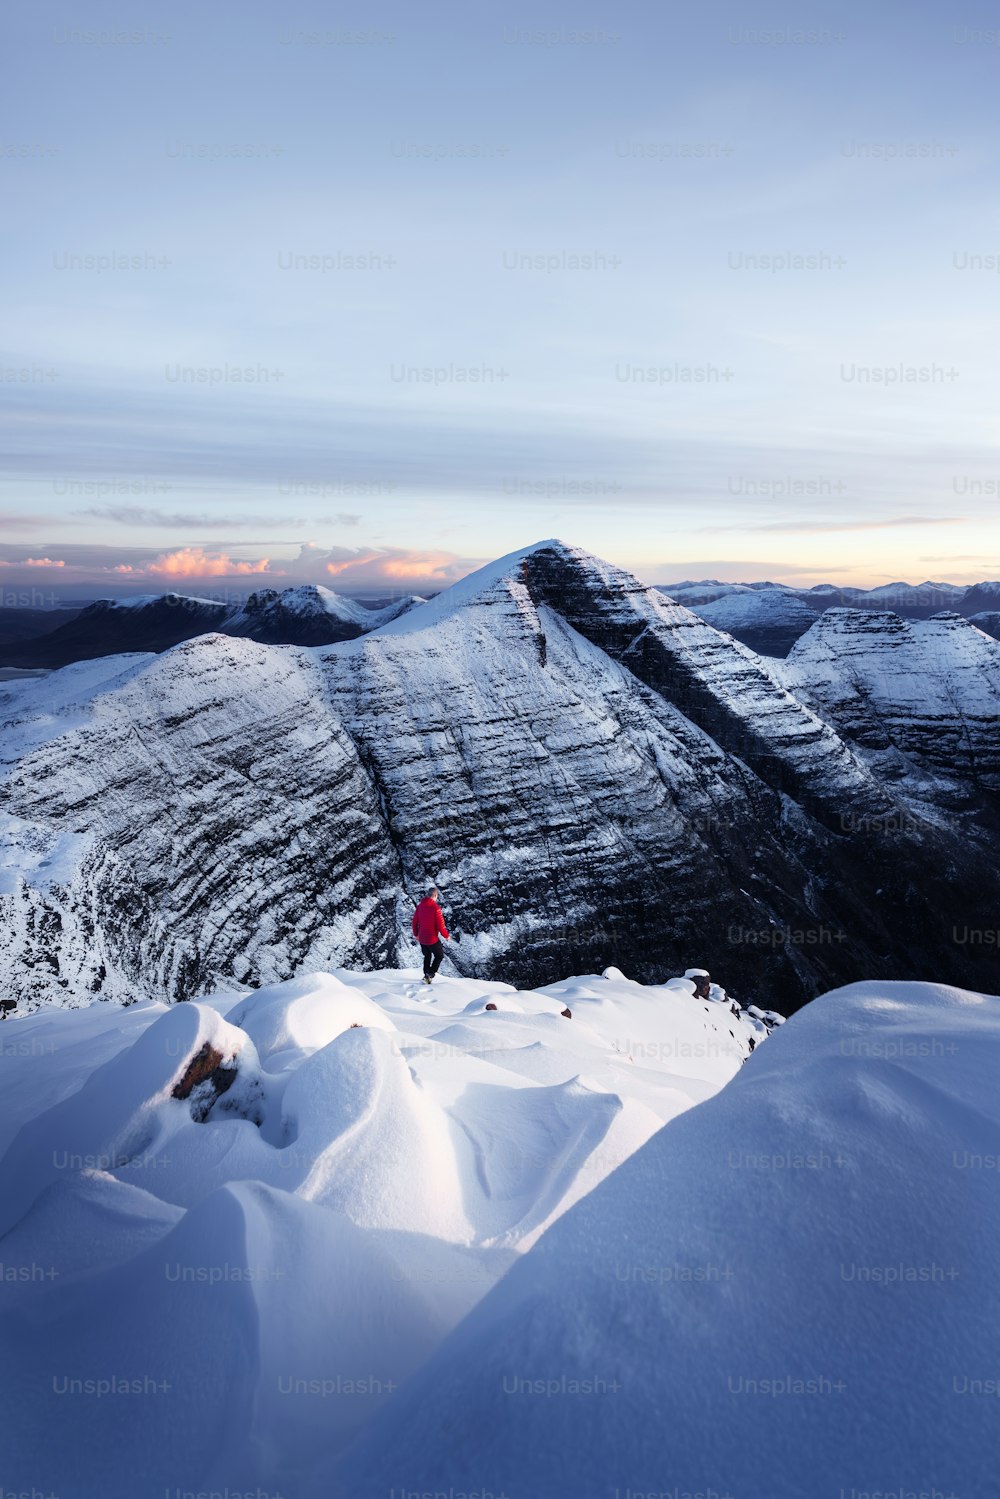 a person standing on top of a snow covered mountain